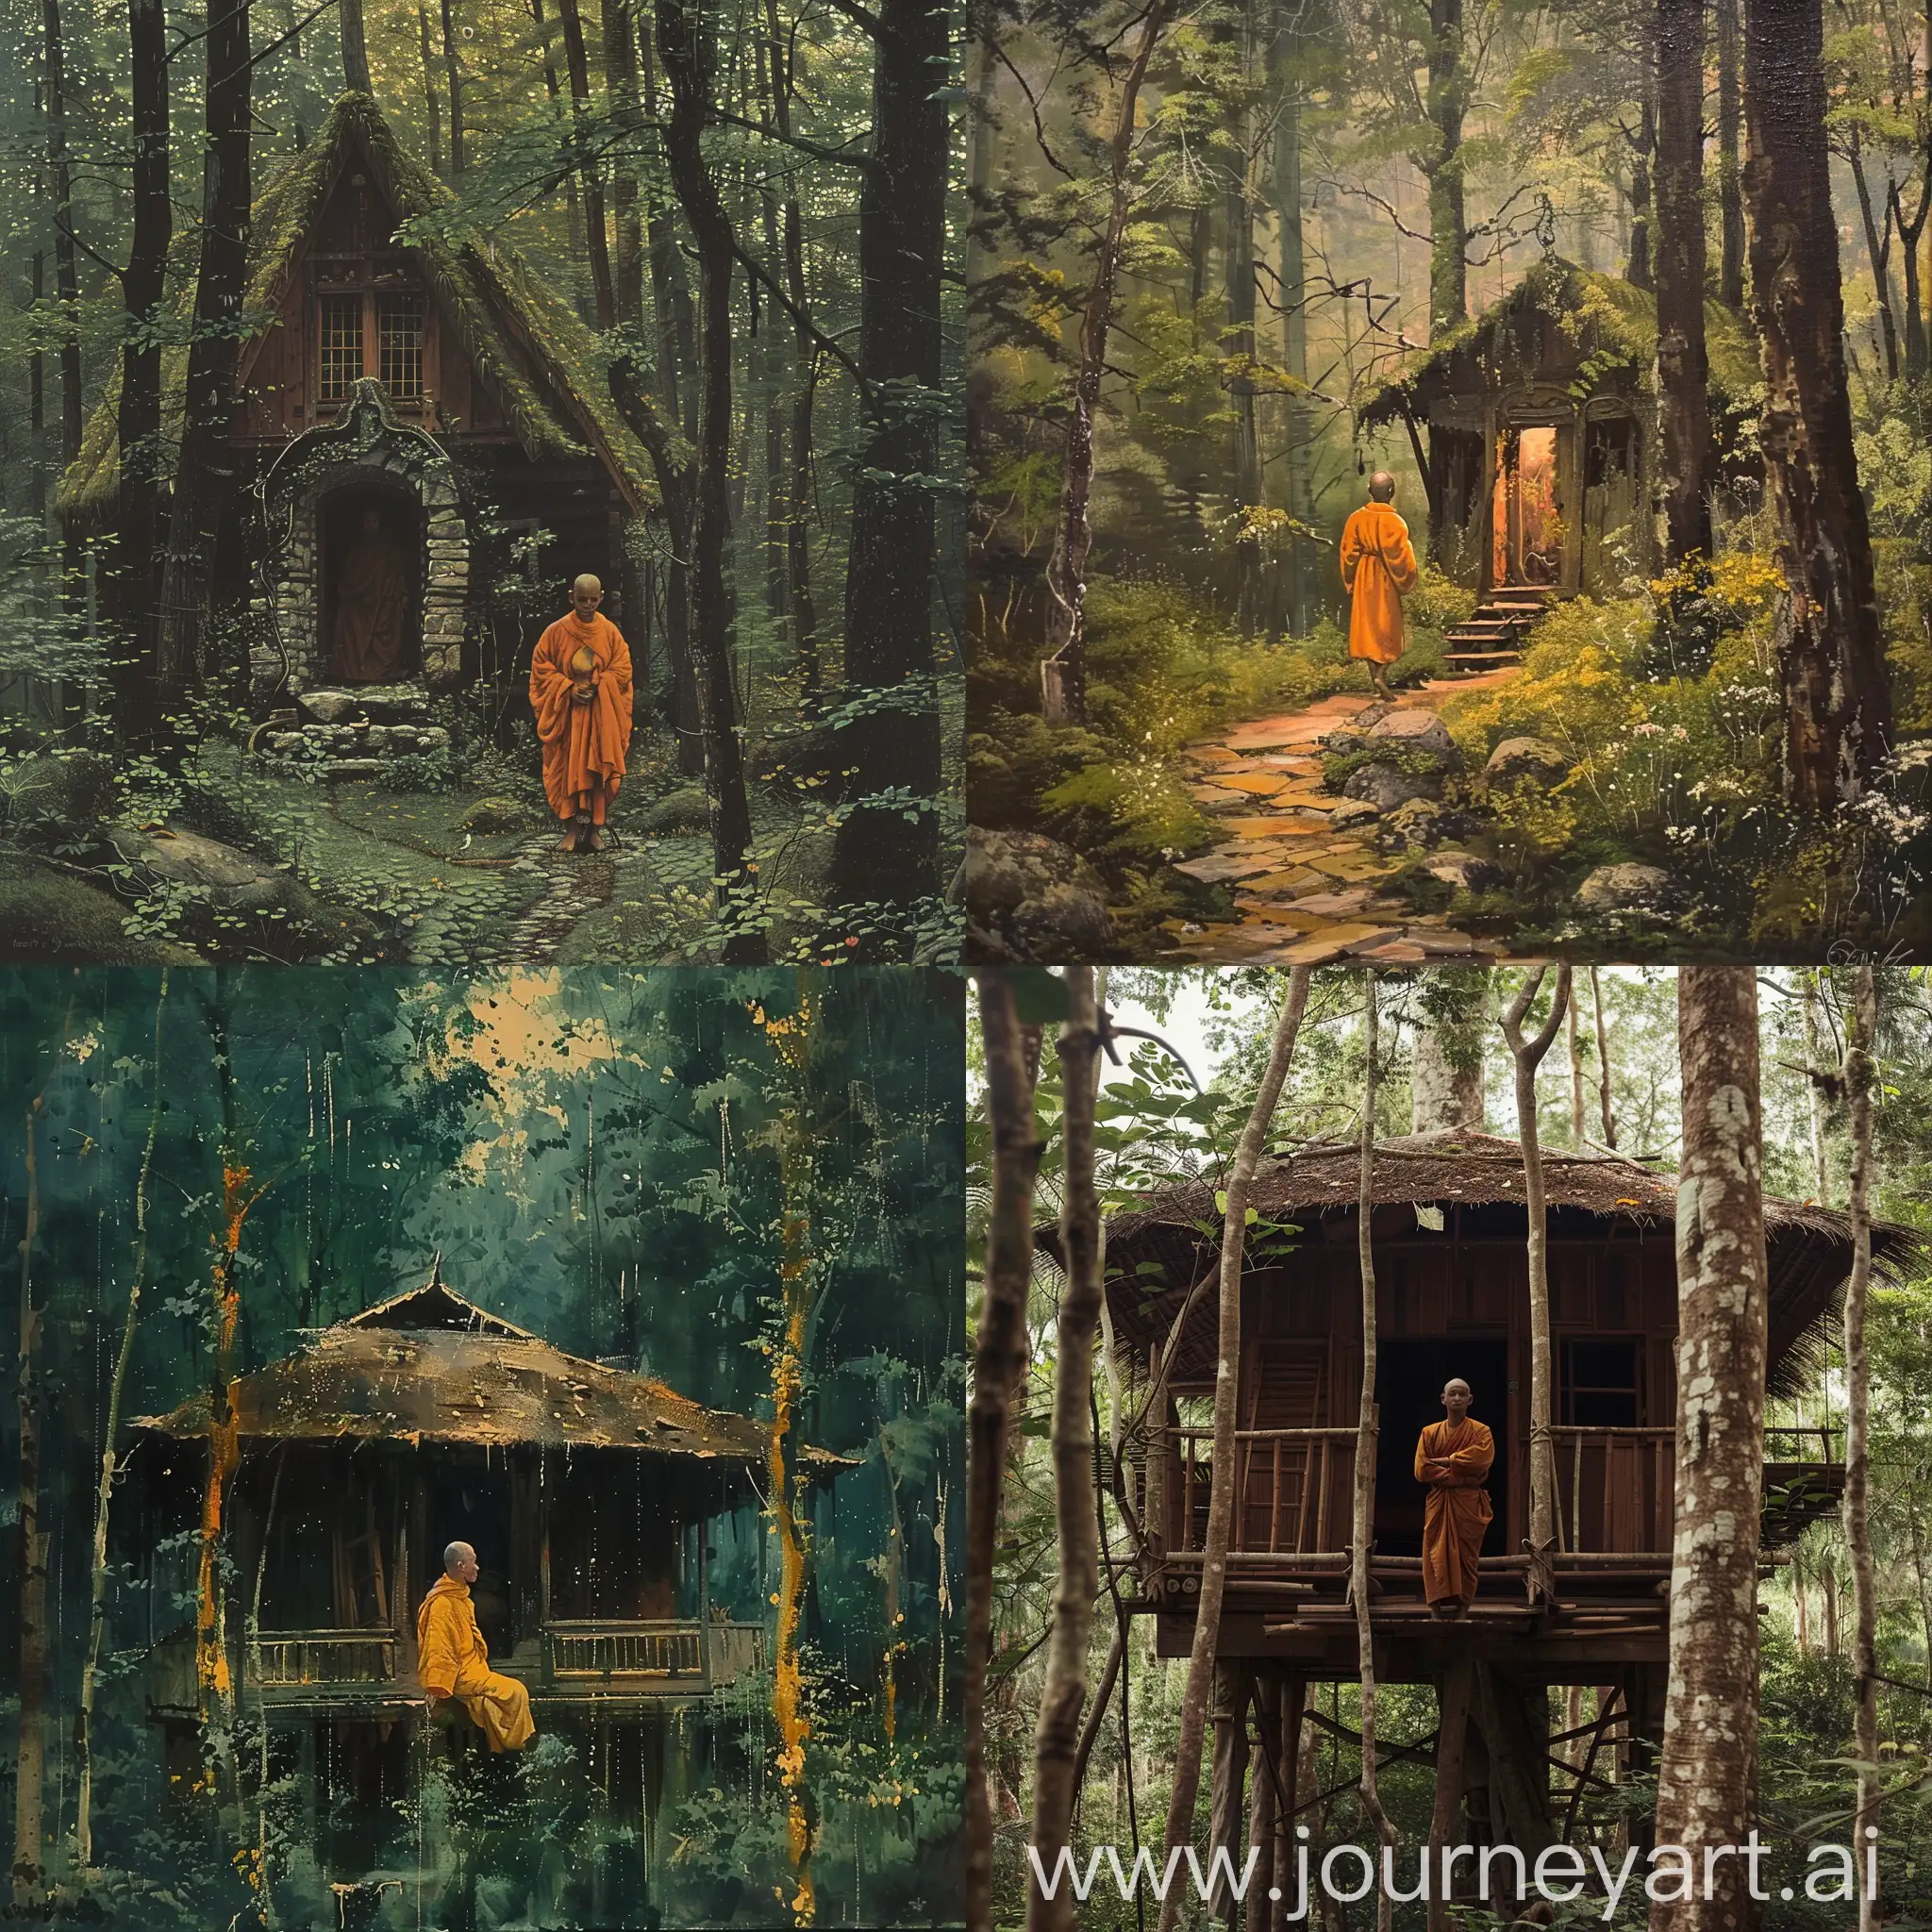 Monk-Contemplating-Serenity-in-Forest-Abode